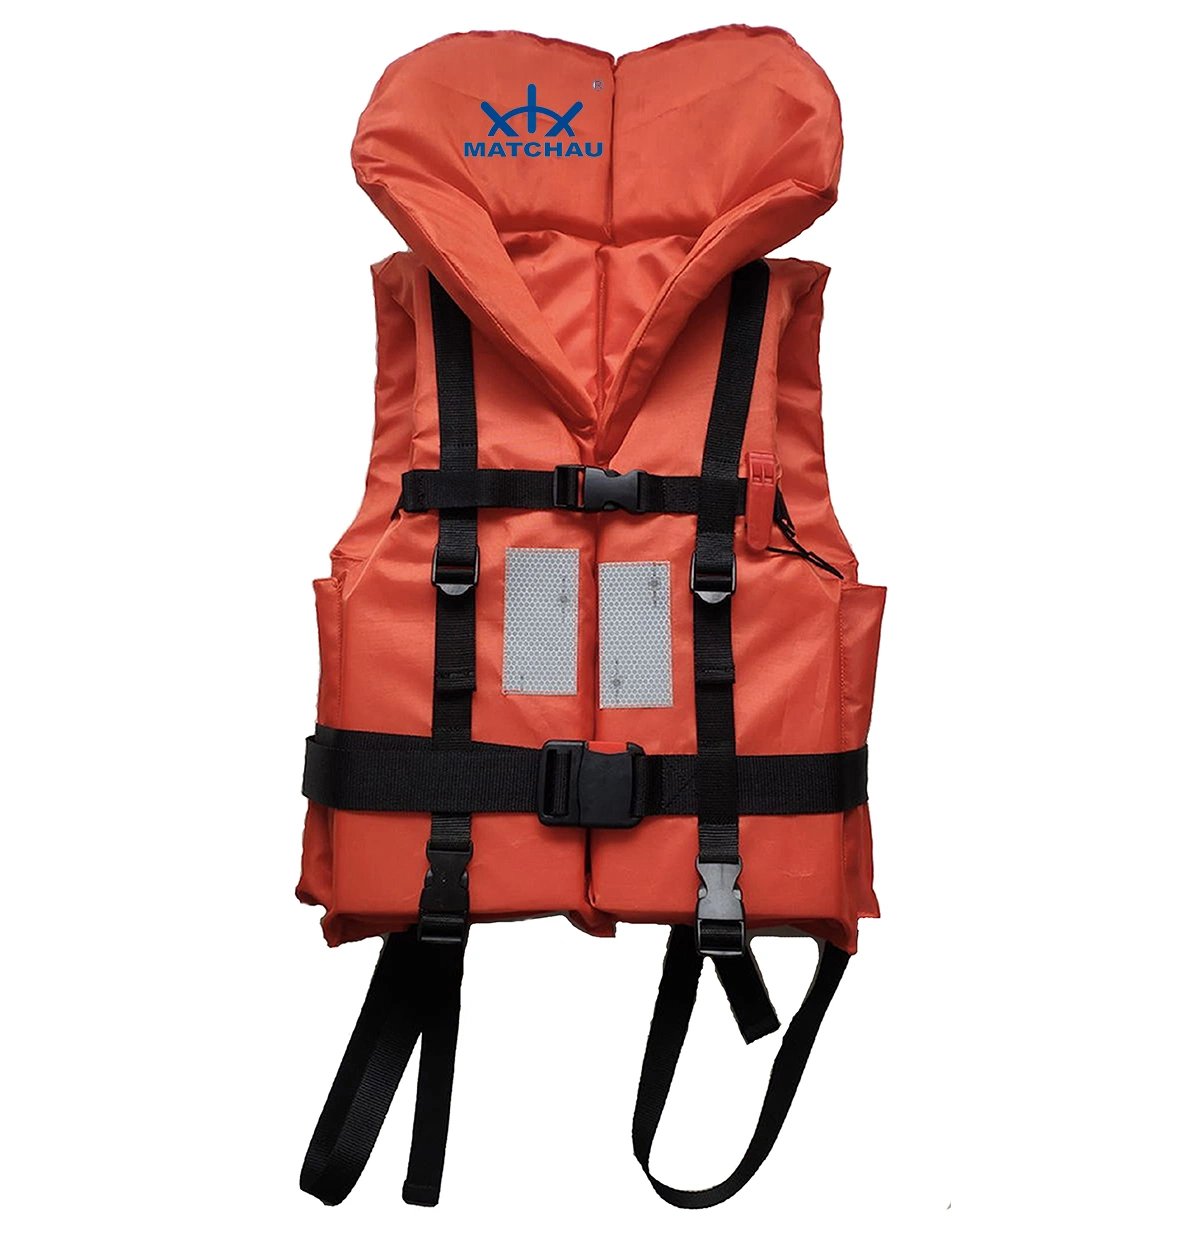 Safety Life Jacket for Boat, Water Sport